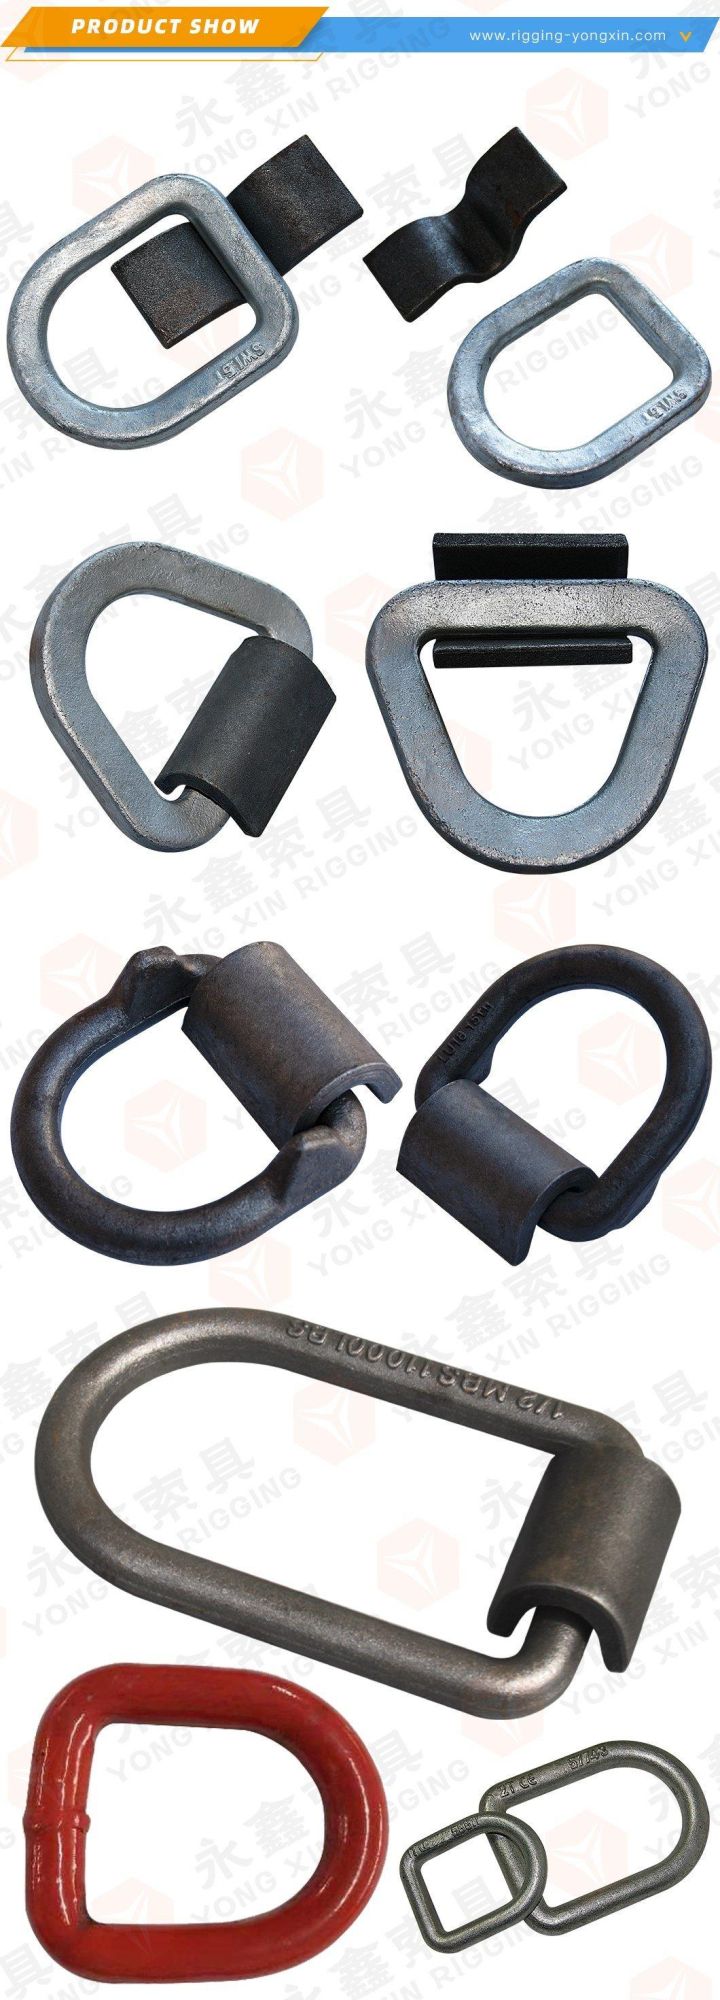 Factory Price D Ring with Strap Type a 1/2" Wll 11000lbs Customized Forged Lashing D Ring